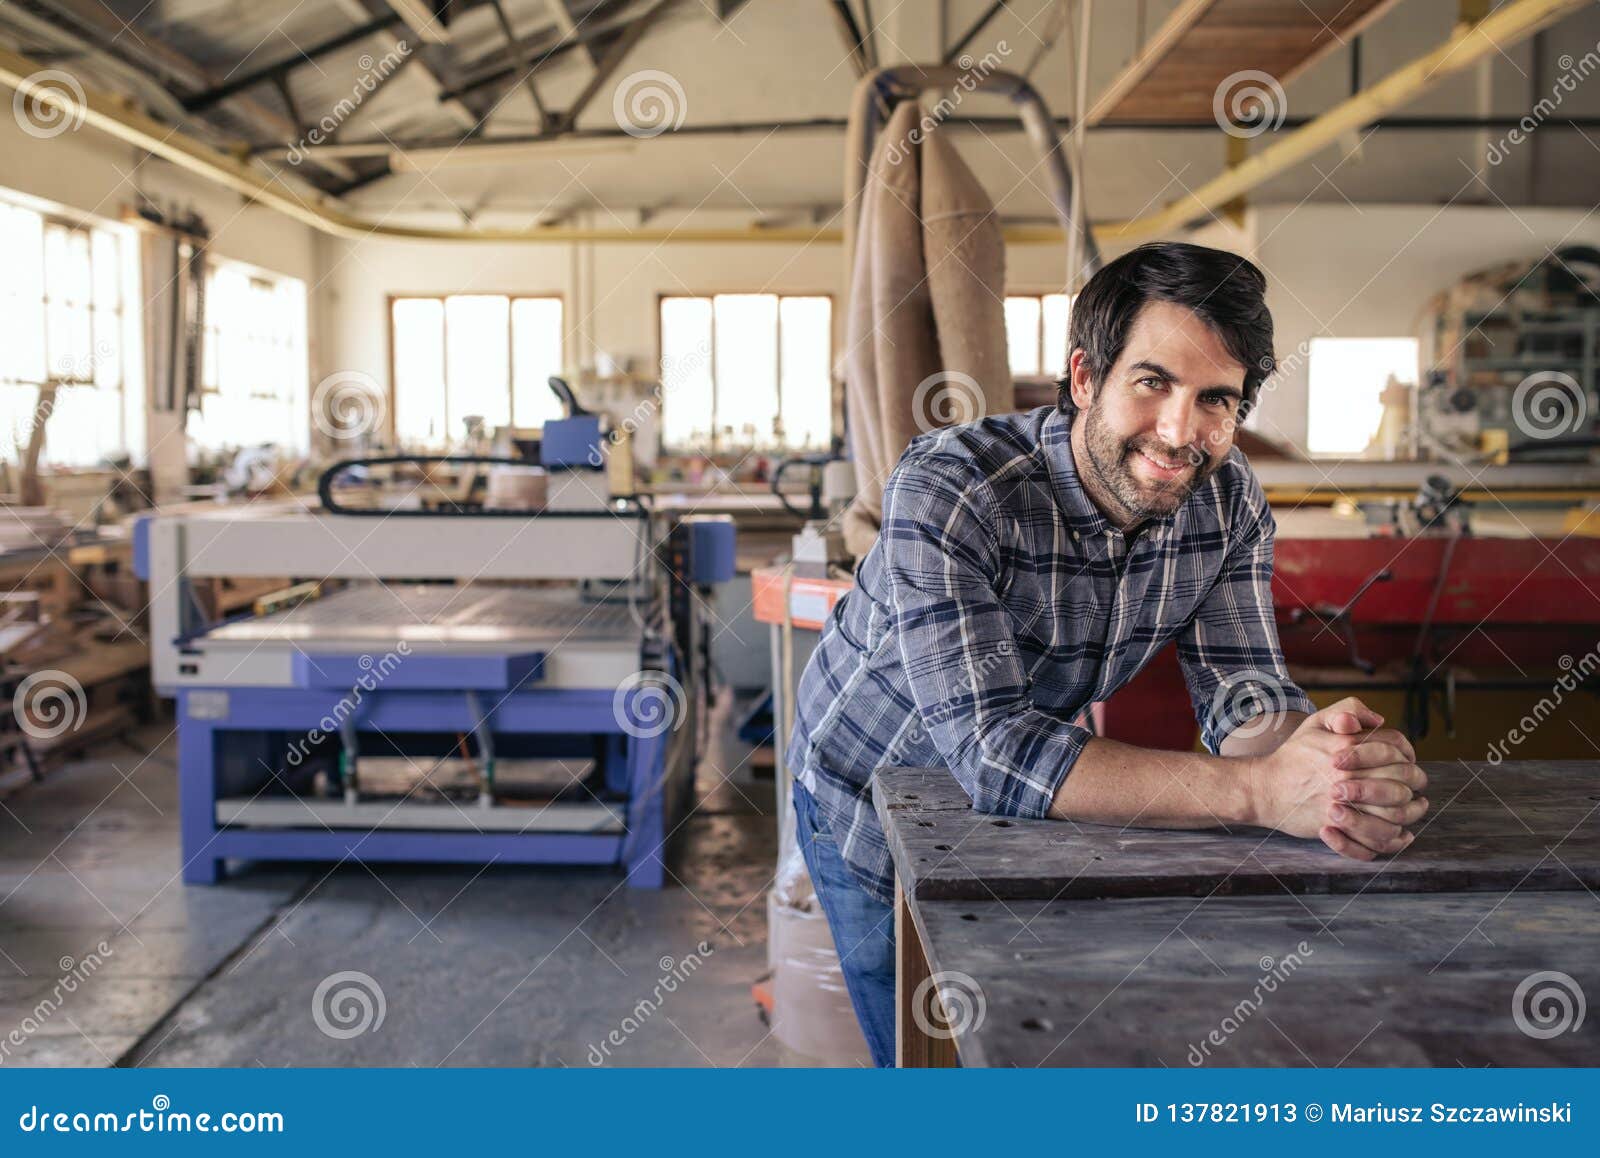 woodworker smiling while leaning on a bench in his workshop